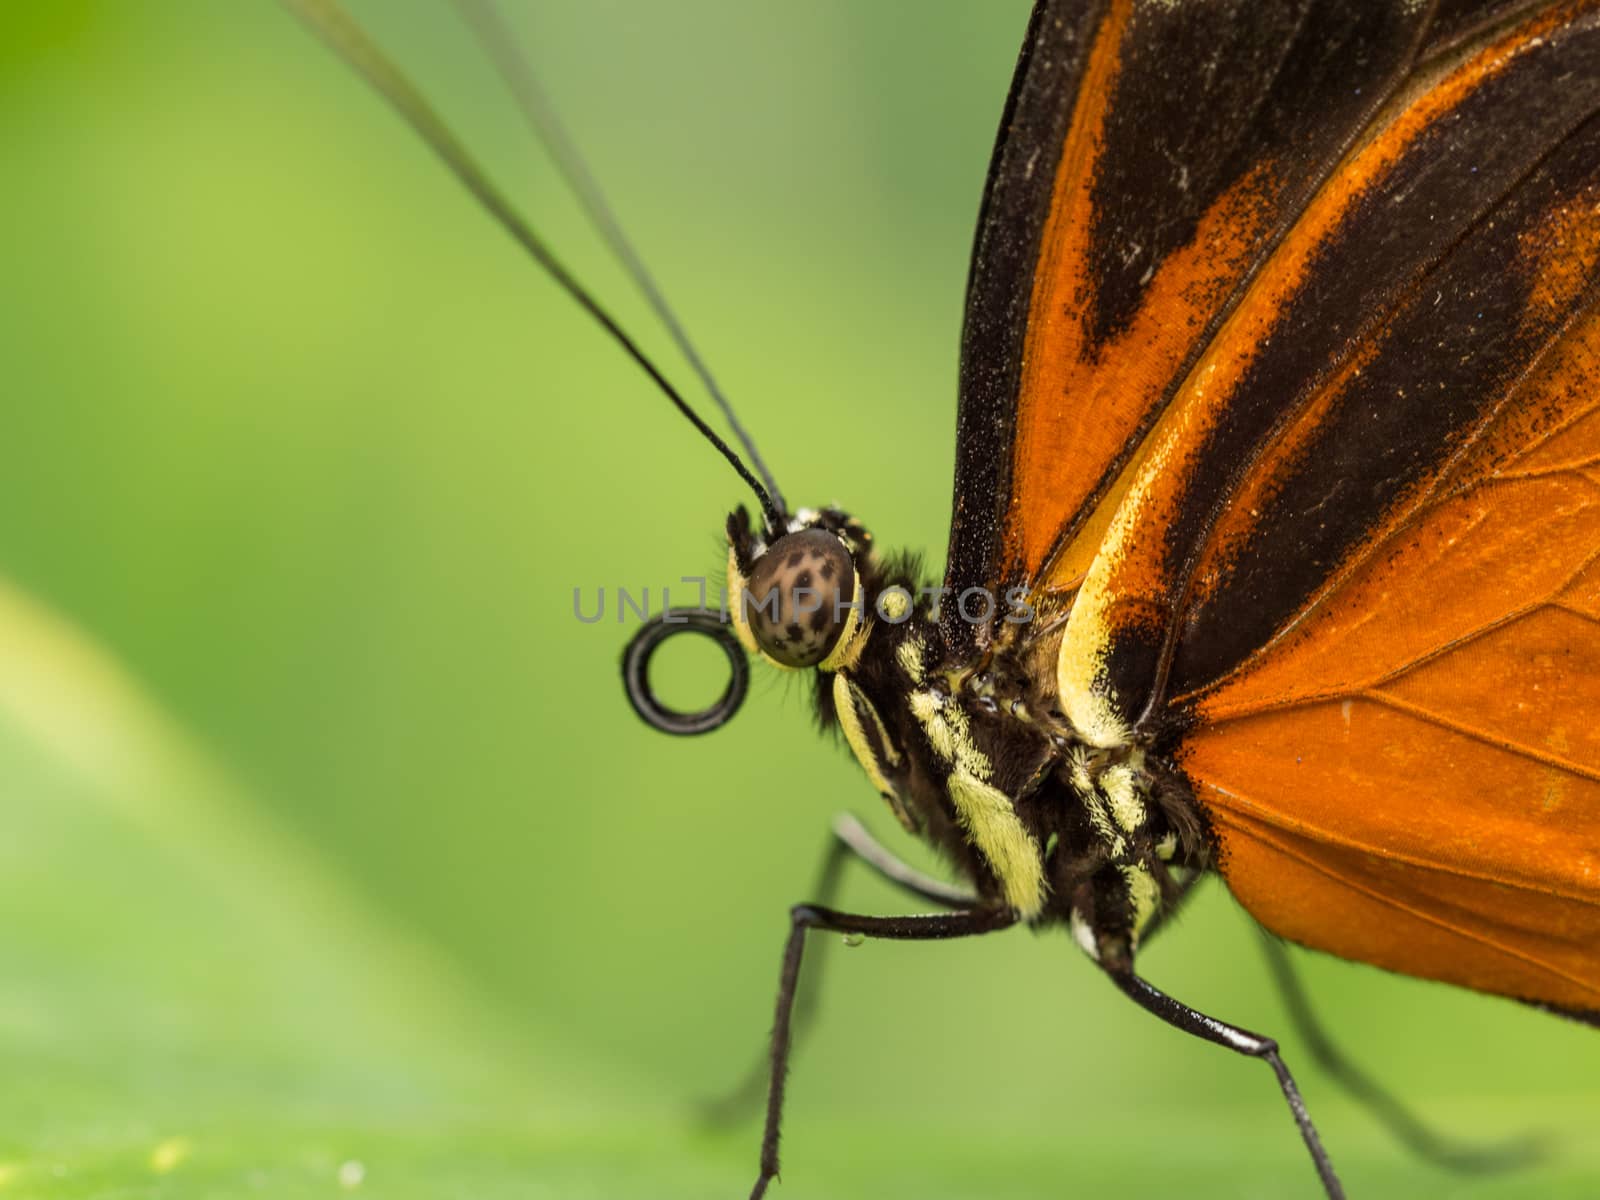 Closeup of Black and orange spotted butterfly standing on leaf